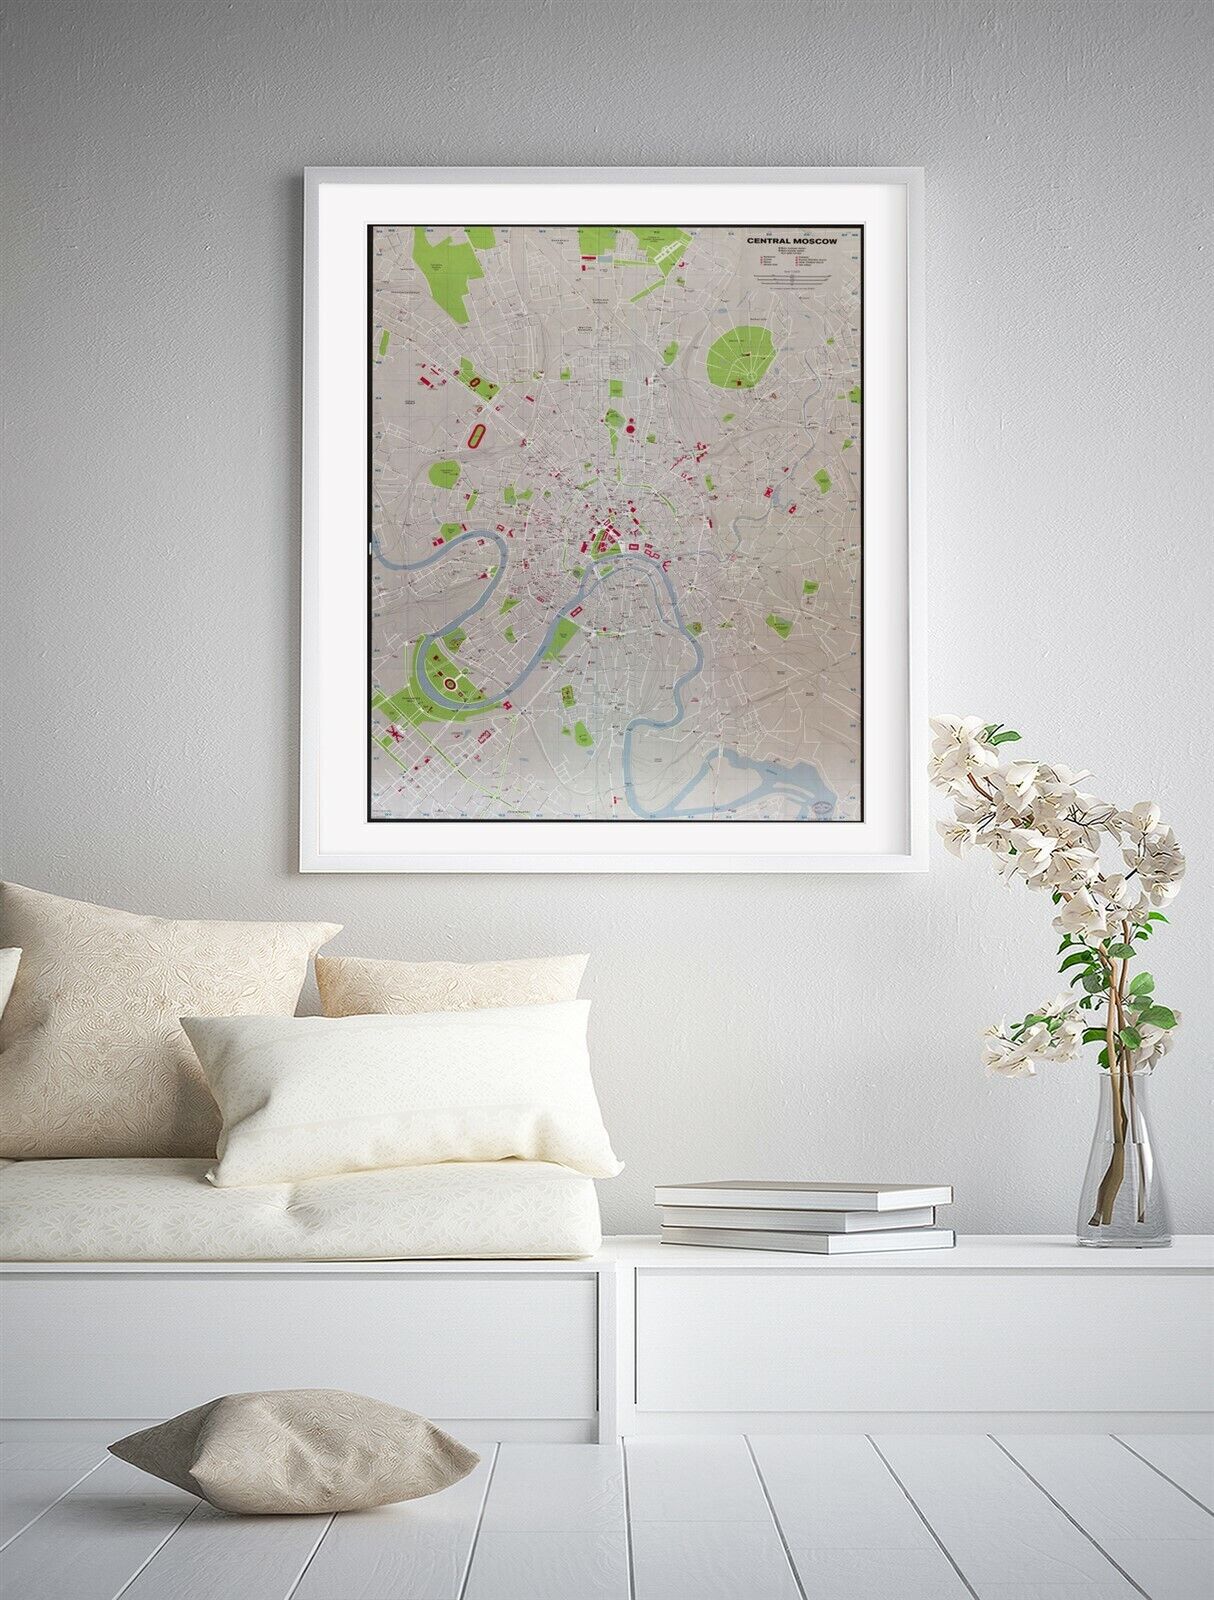 1980 Map| Central Moscow| Moscow|Moscow Russia|Russia Map Size: 20 inches x 24 i